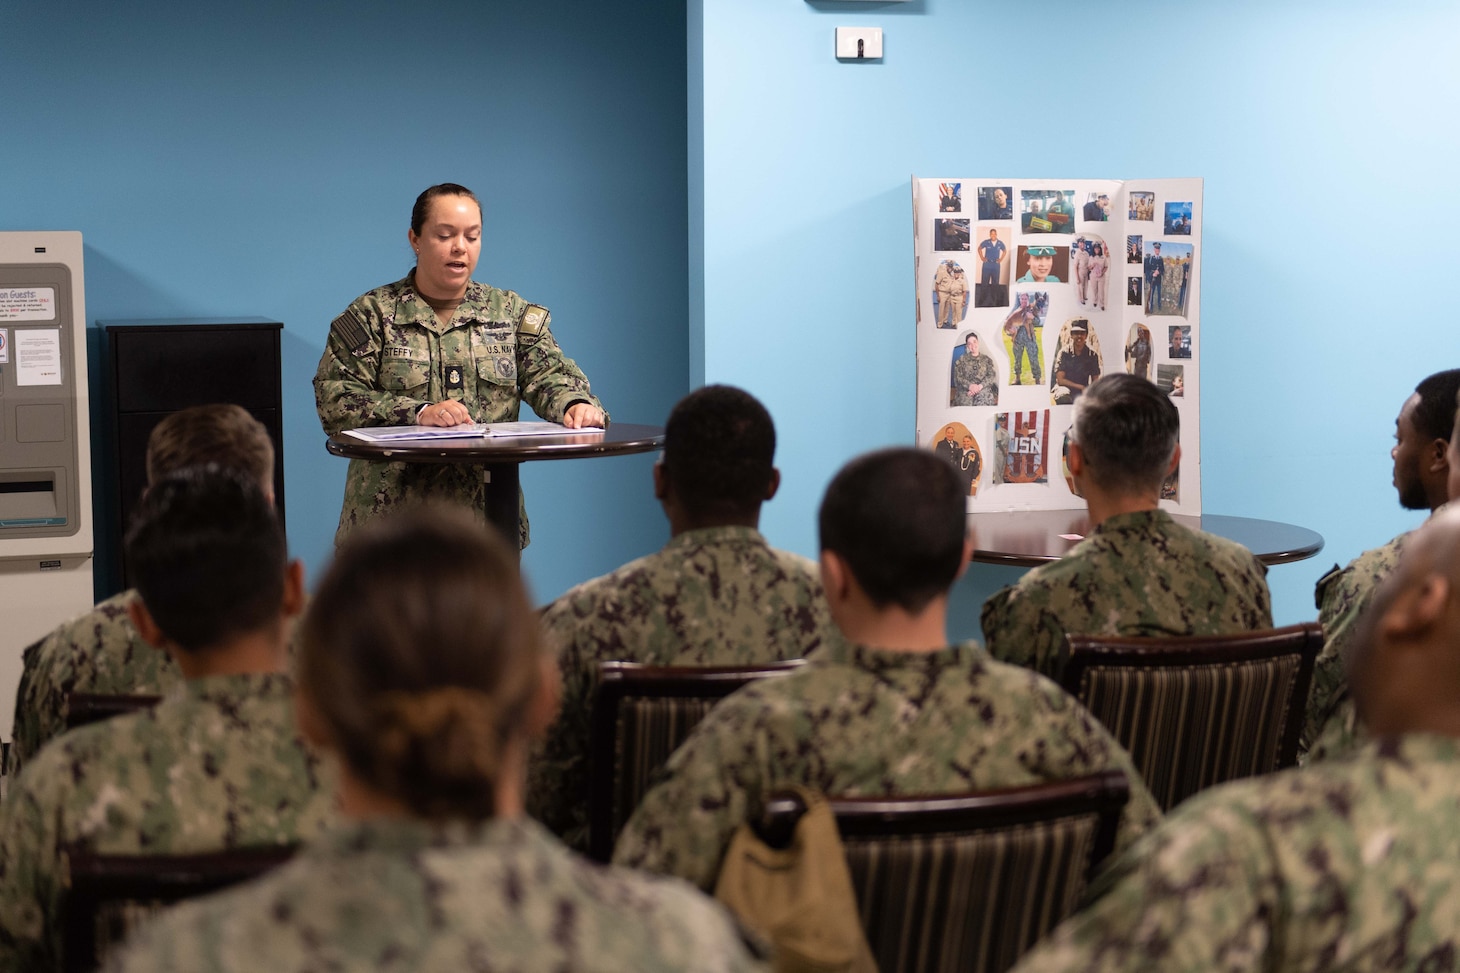 Chief Navy Counselor Megan Steffy, assigned to Naval Support Activity (NSA) Souda Bay, discusses the contributions of women to the U.S. military during a commemoration of the 75th anniversary of the Women’s Armed Services Integration Act on June 12, 2023.